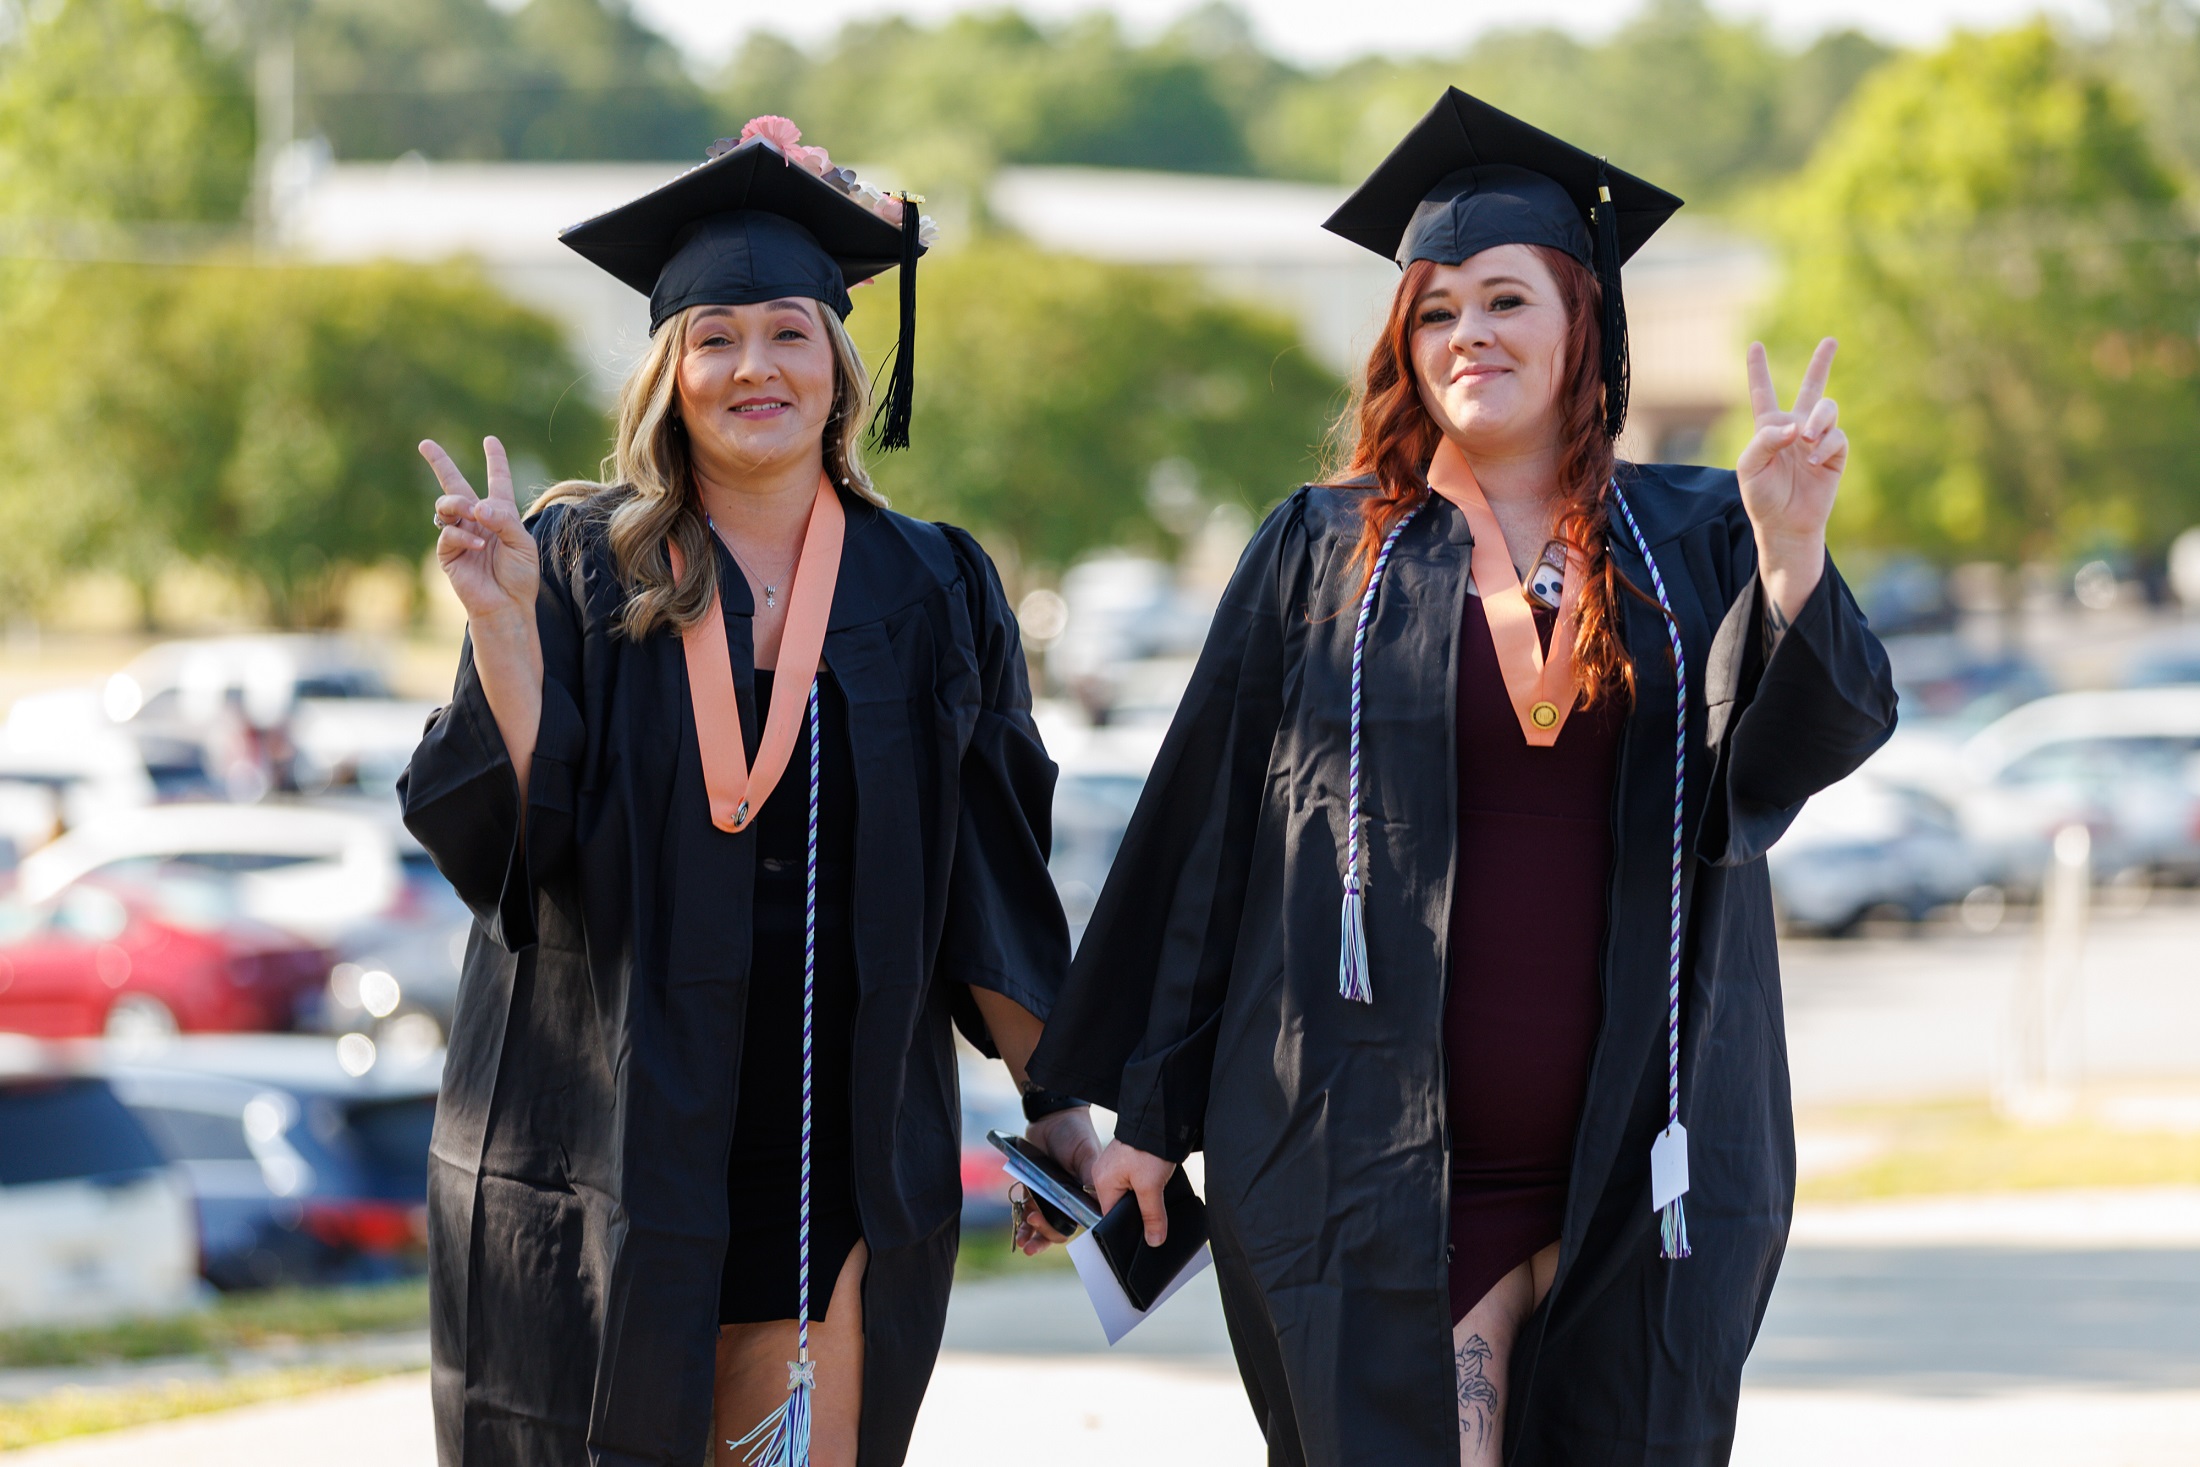 Two graduates hold up two fingers in a "peace sign" as they walk outside the Crown.